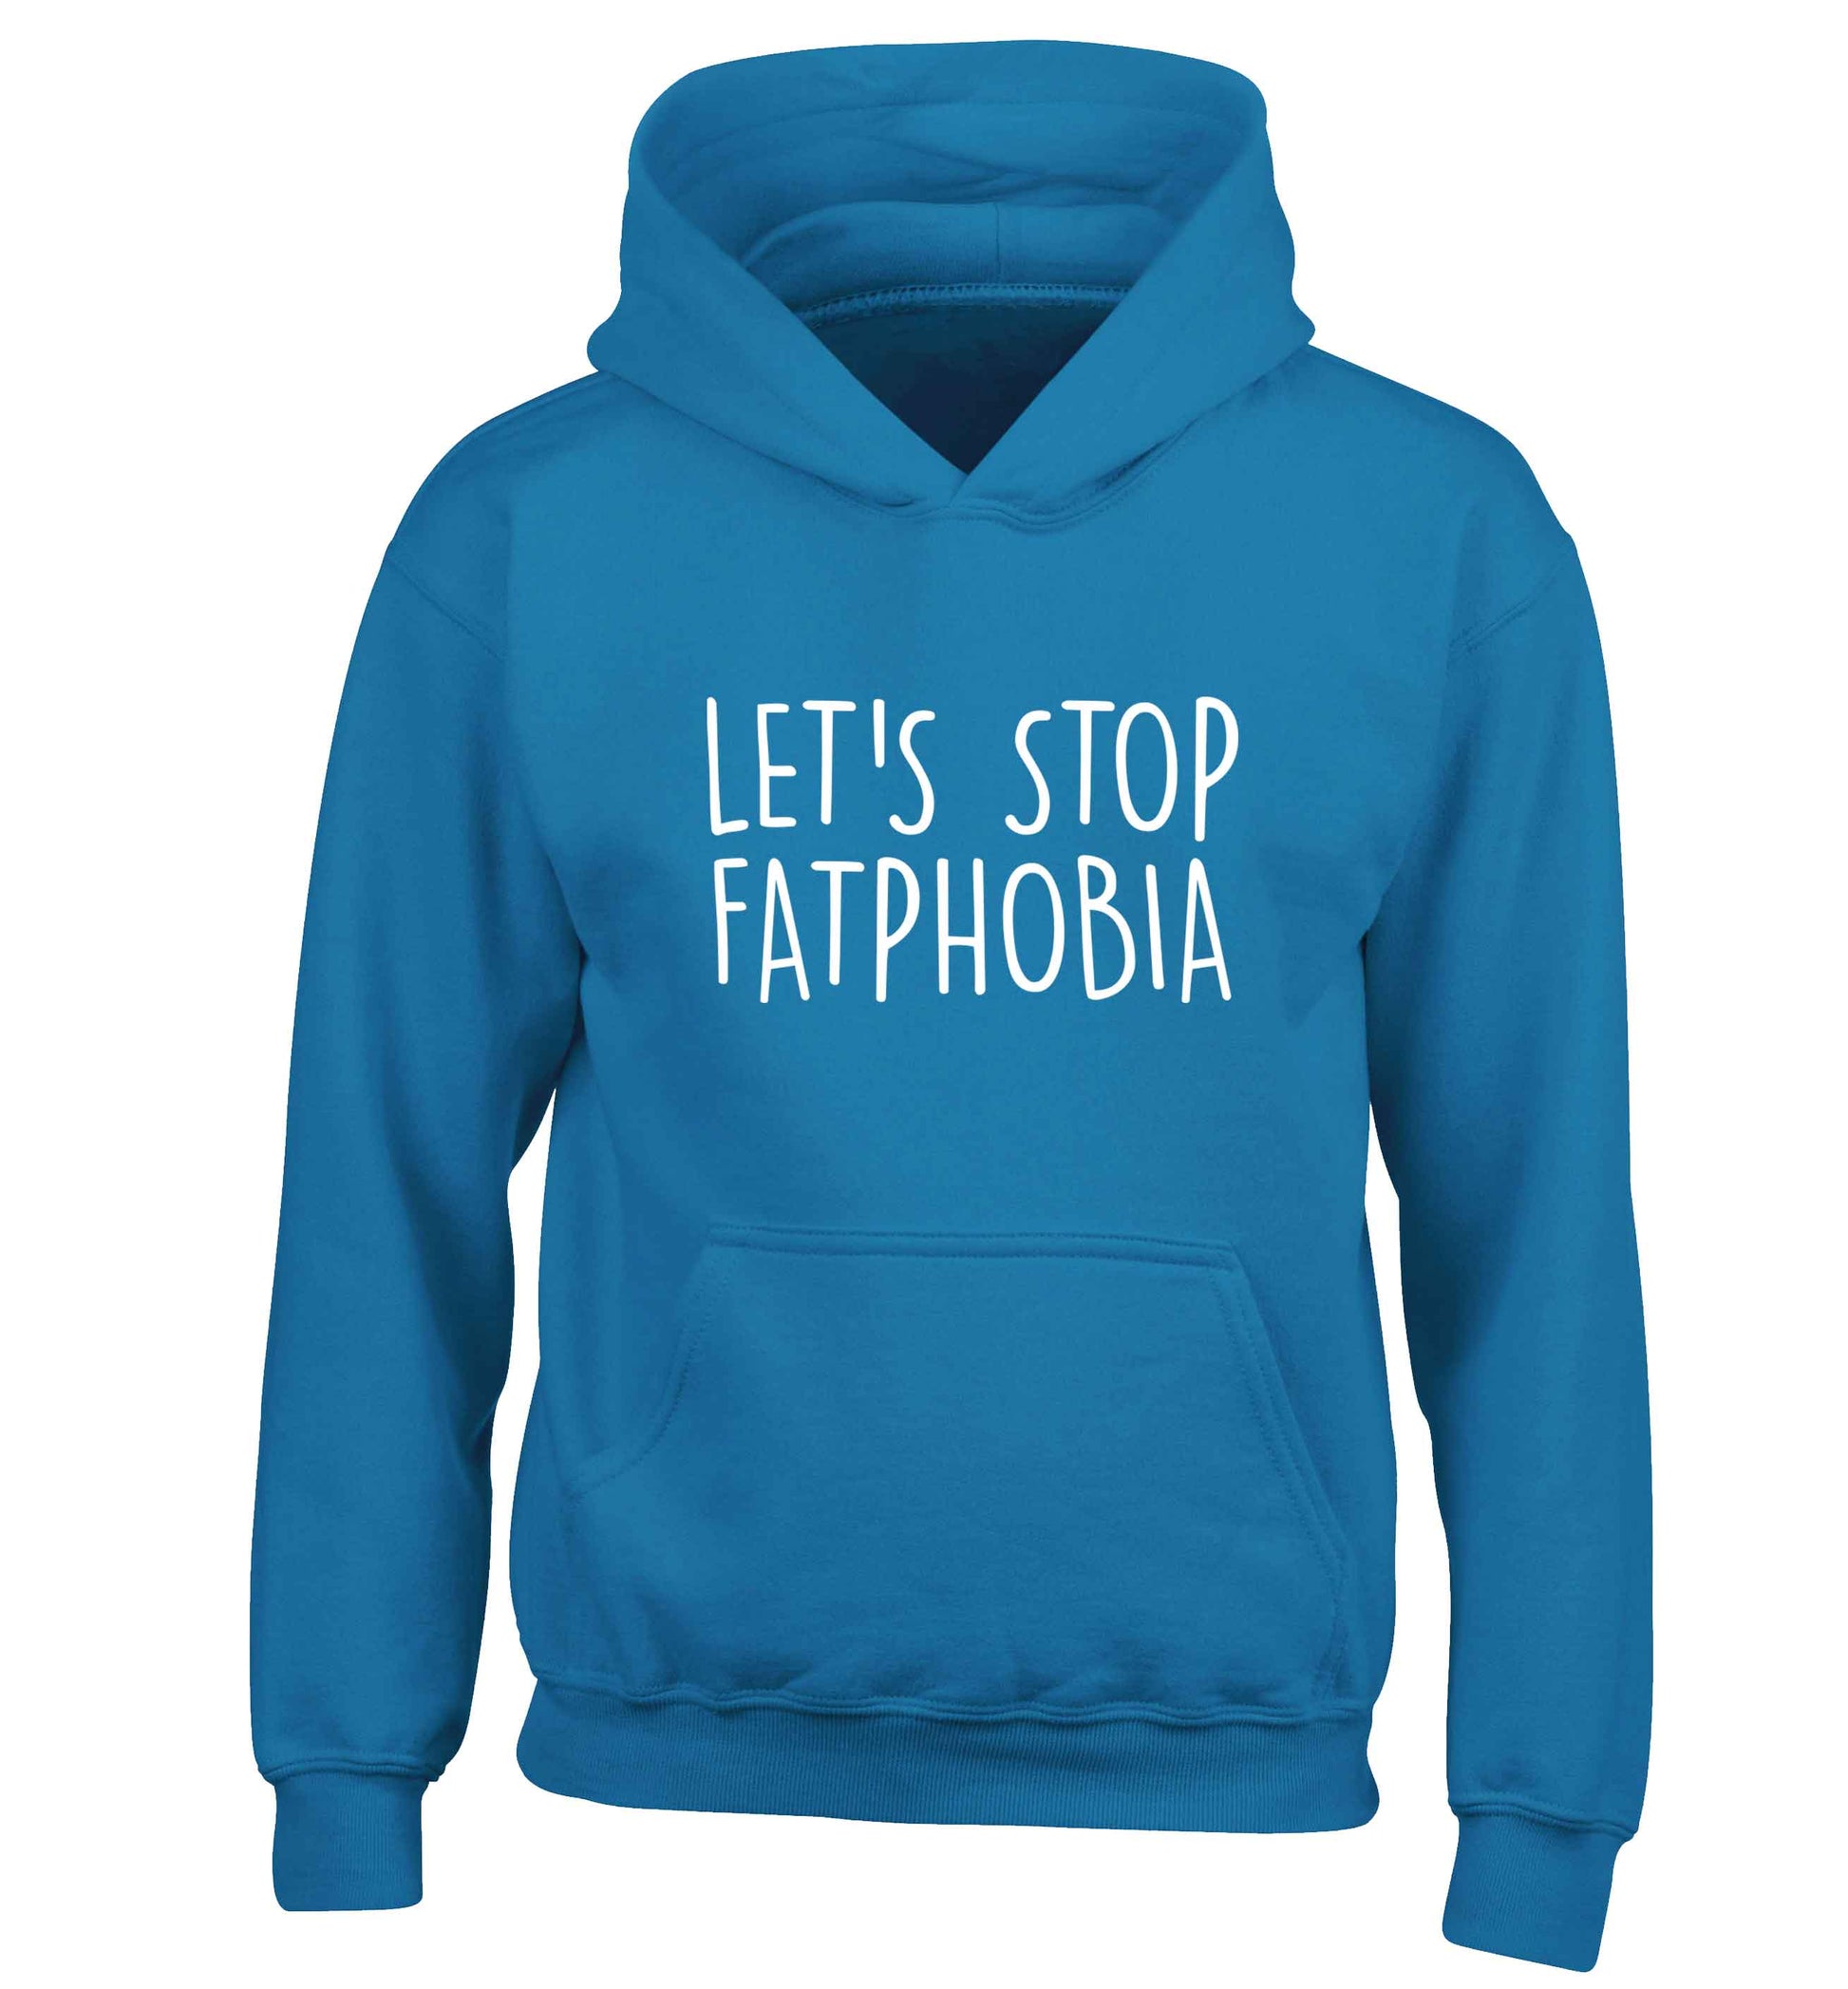 Let's stop fatphobia children's blue hoodie 12-13 Years